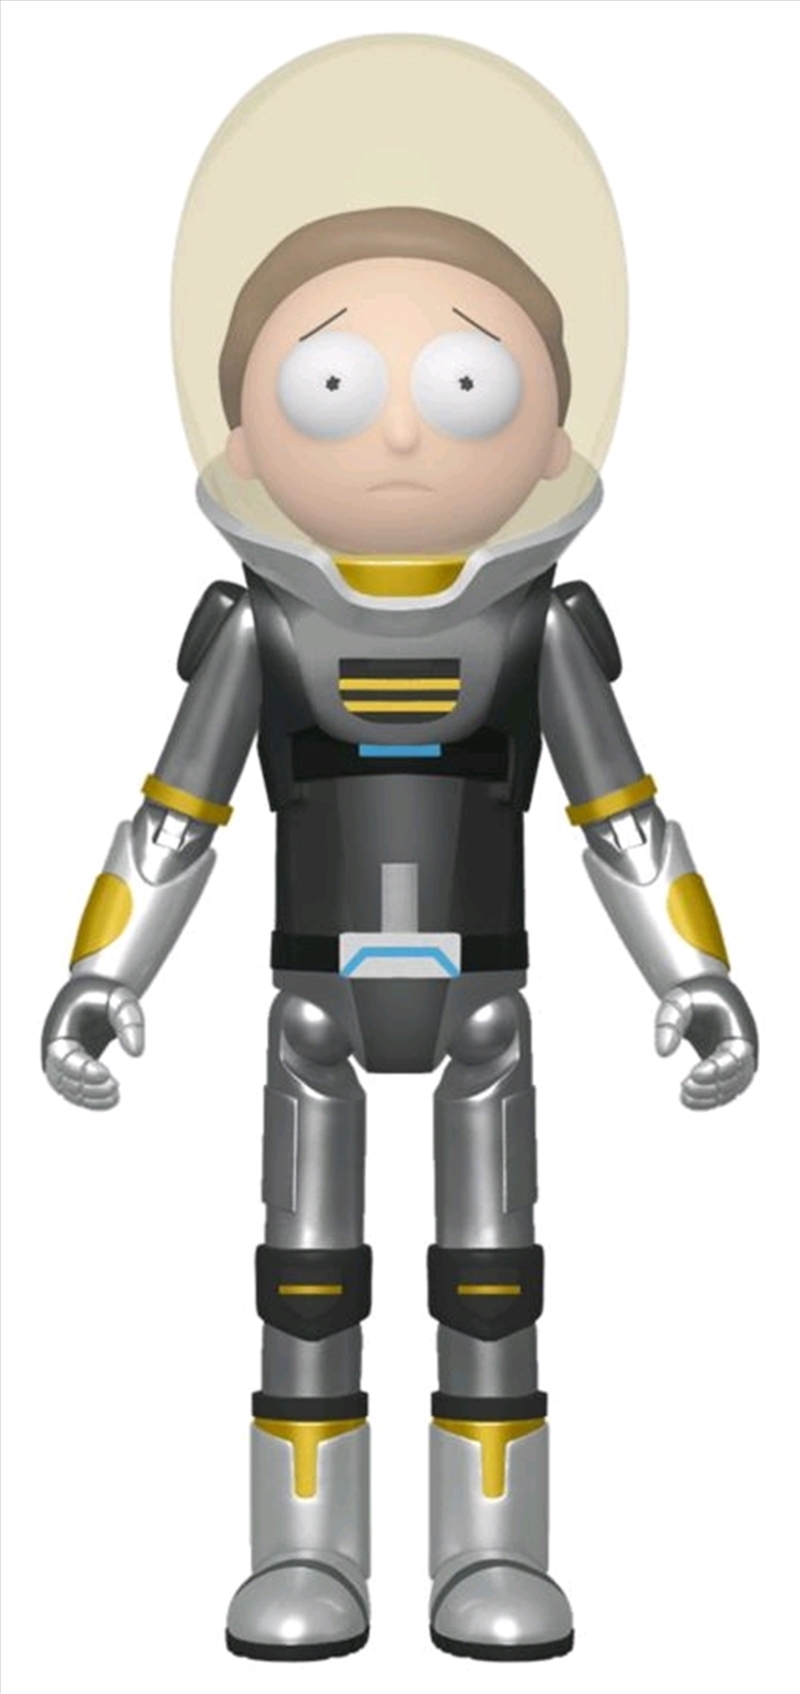 Rick and Morty - Space Suit Morty Metallic Action Figure [RS]/Product Detail/Figurines